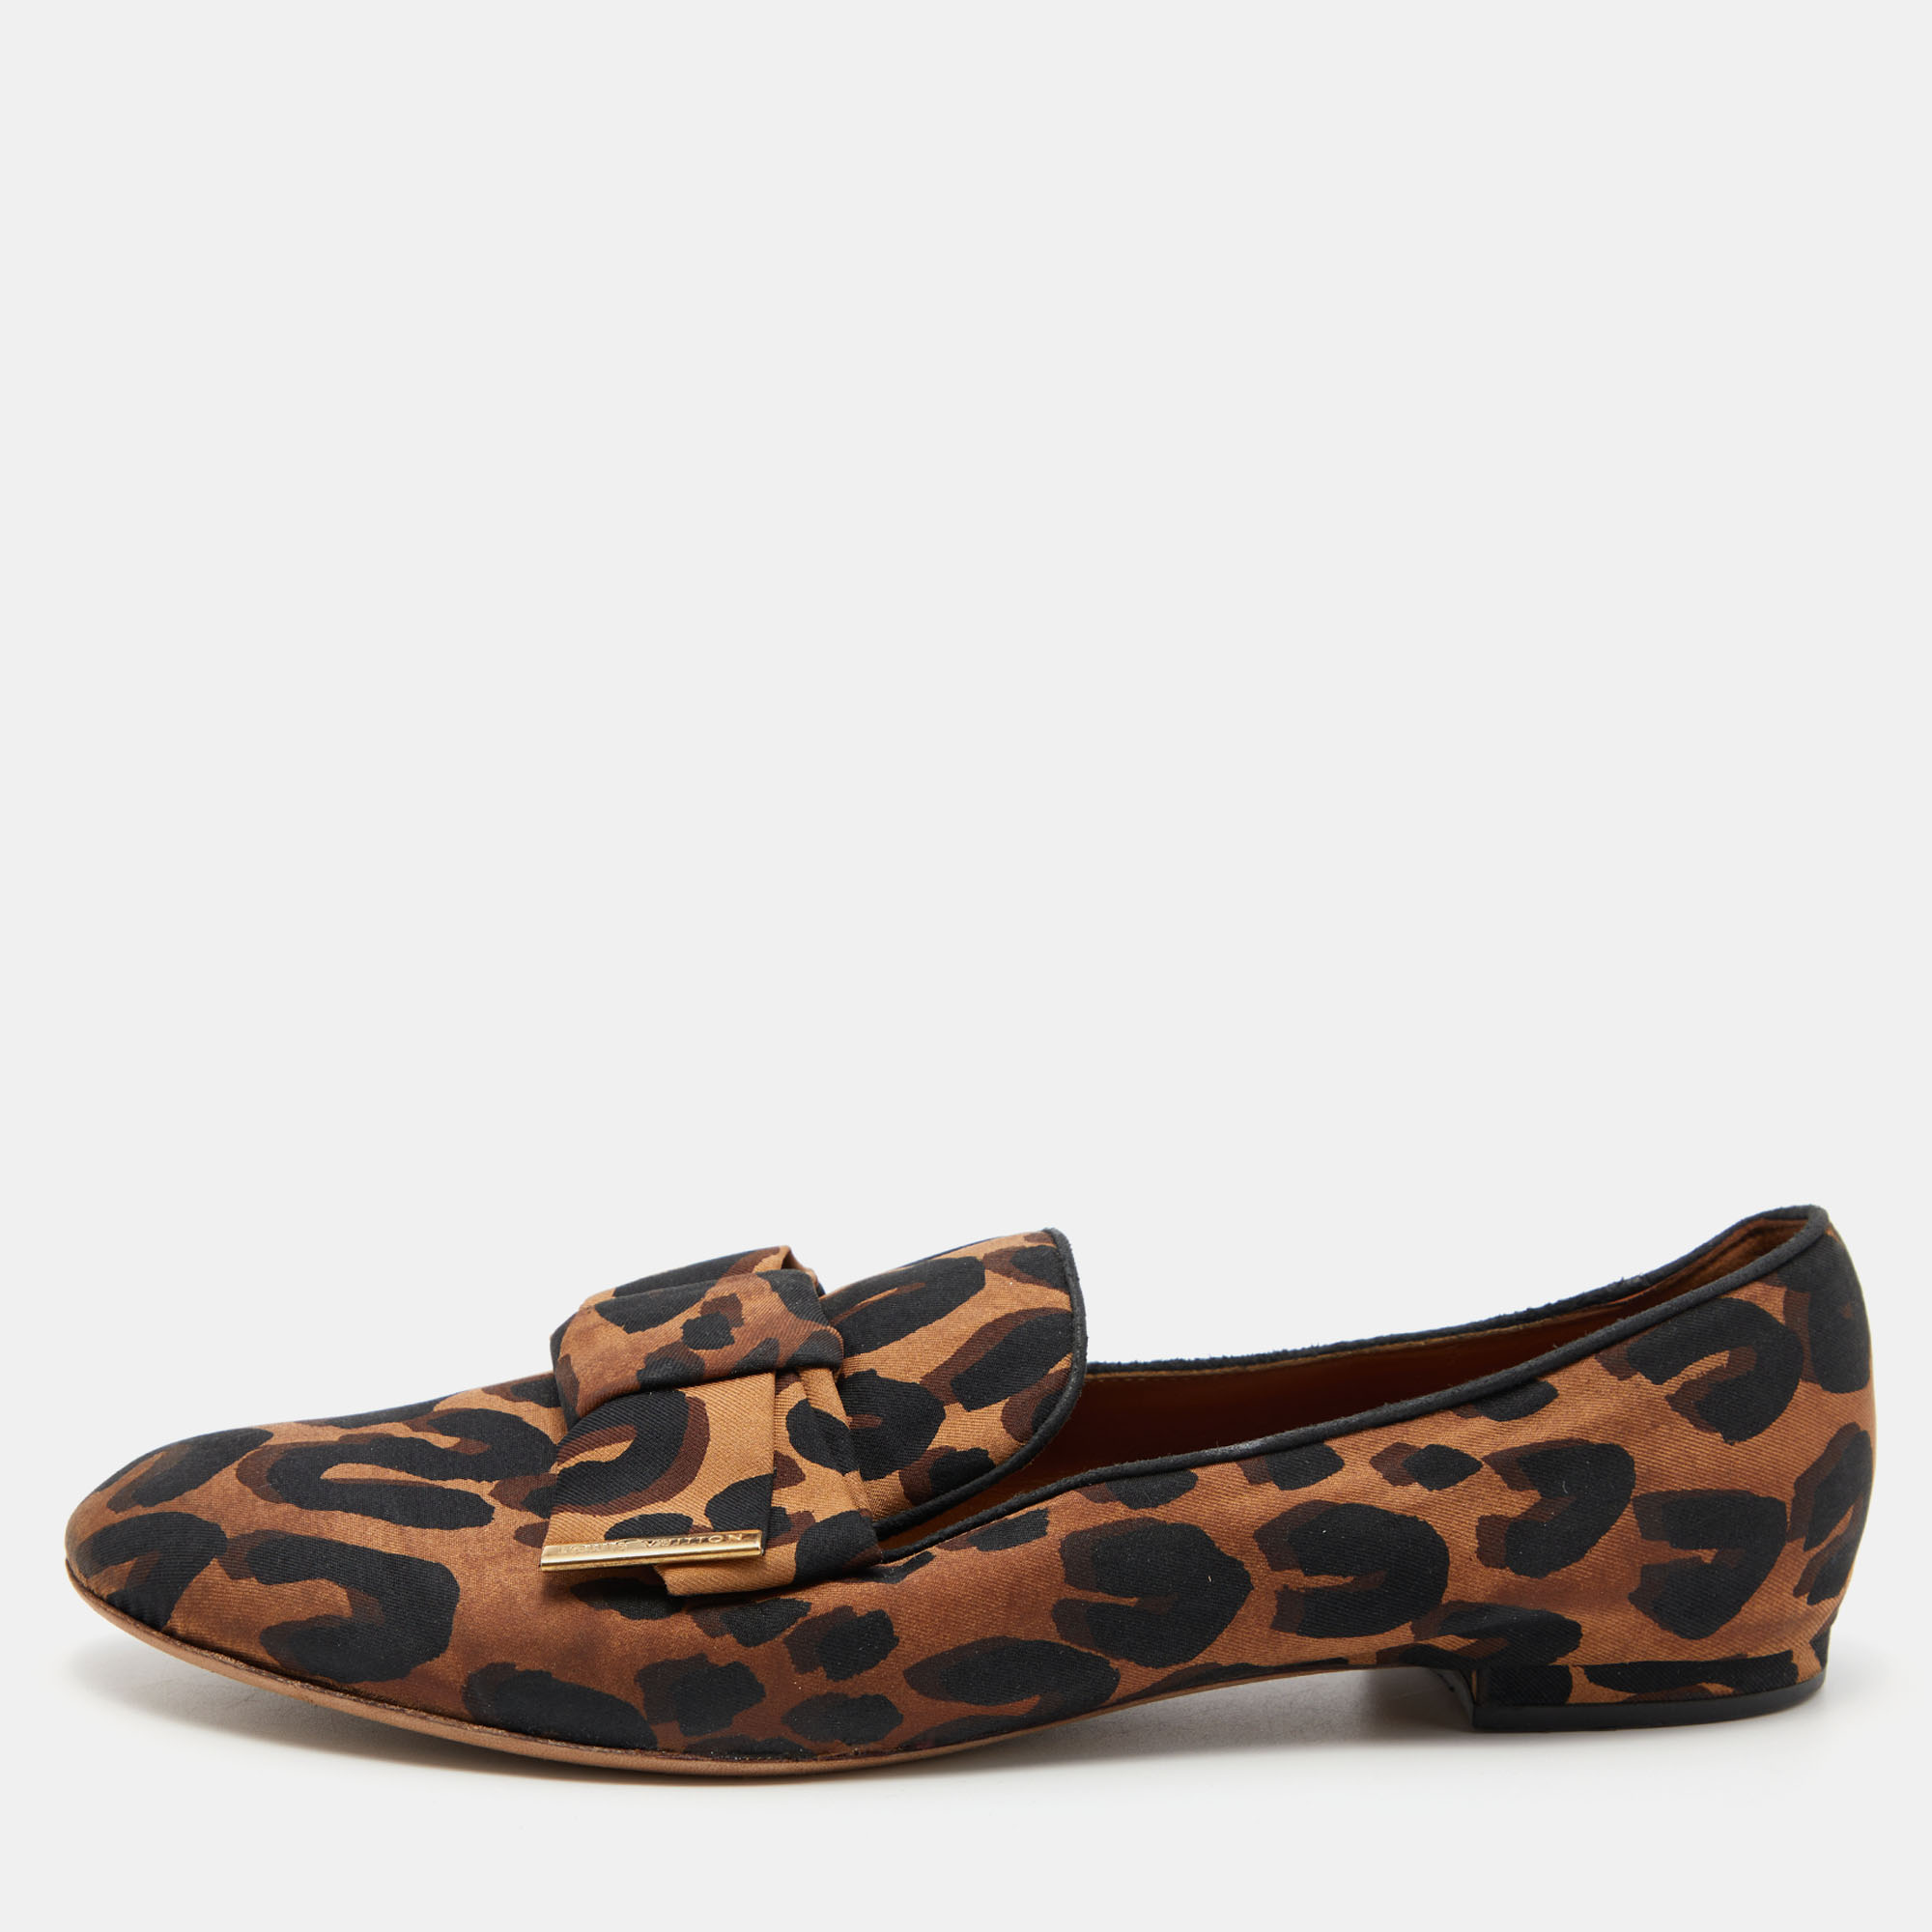 Pre-owned Louis Vuitton Brown Leopard Printed Fabric Bow Detail Smoking Slippers Size 39